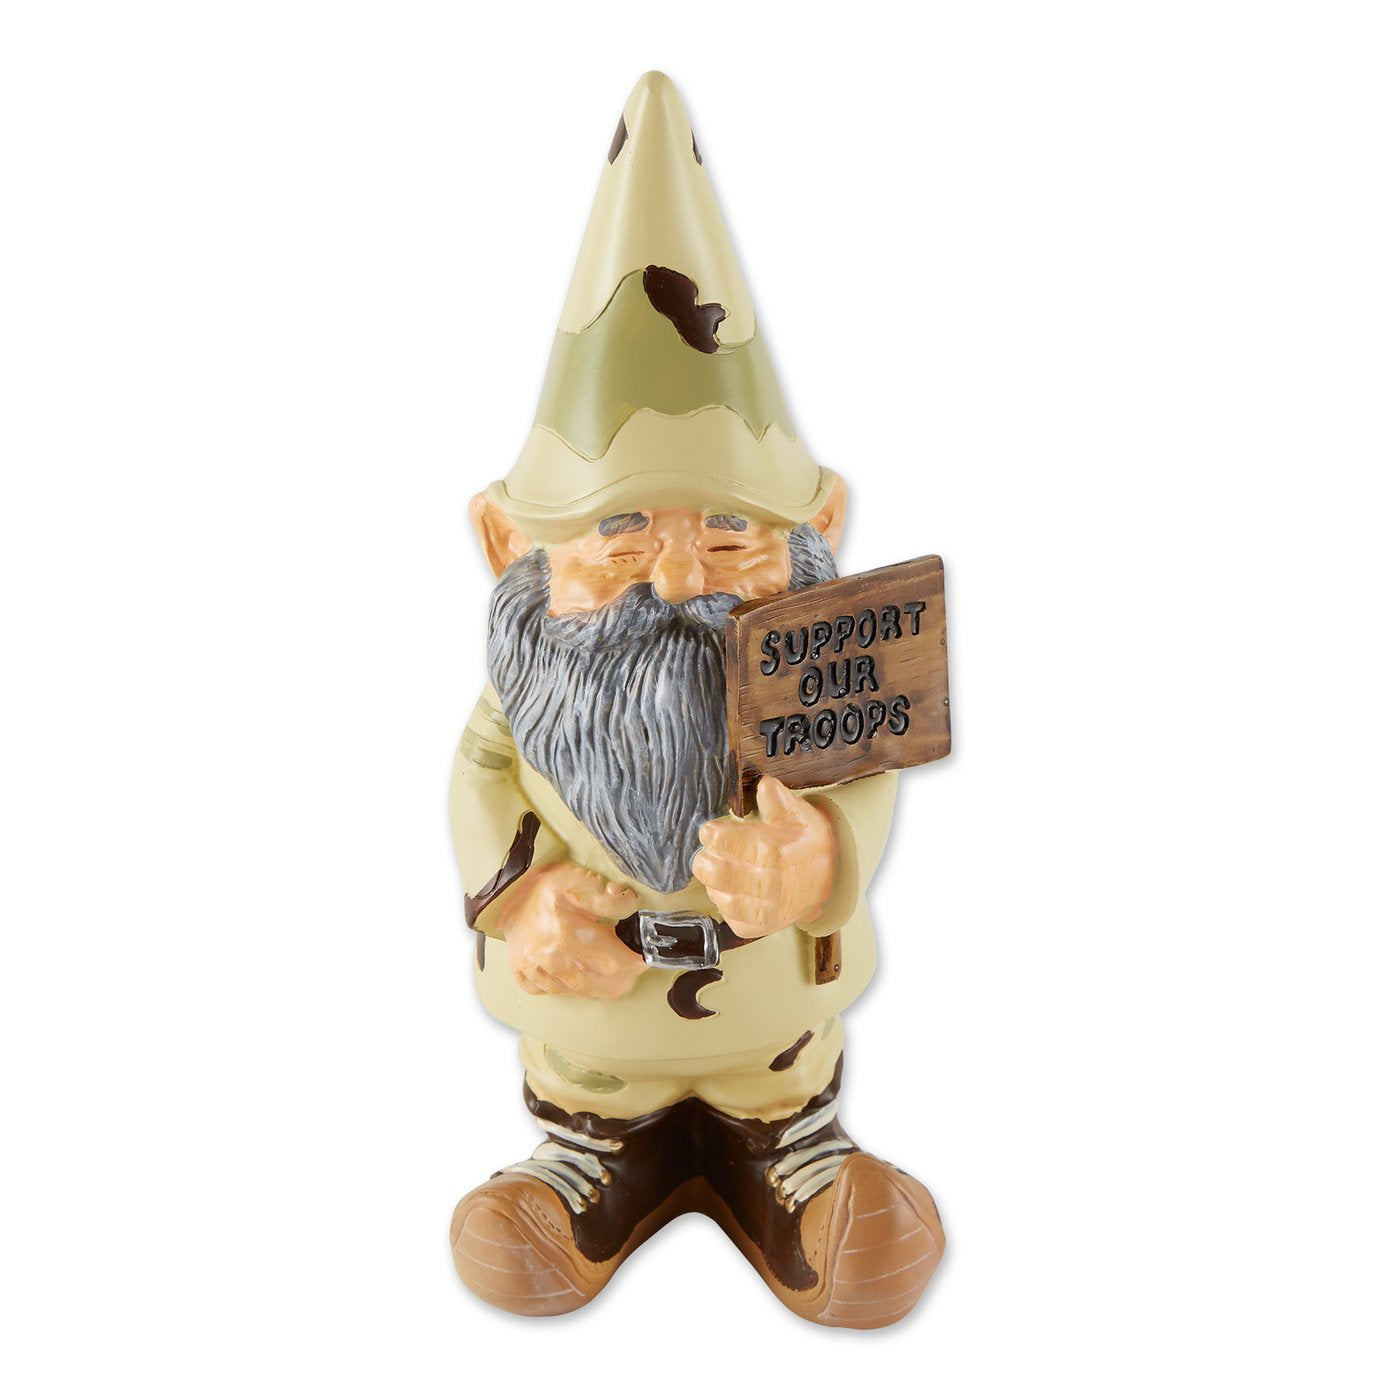 Support Our Troops Gnome